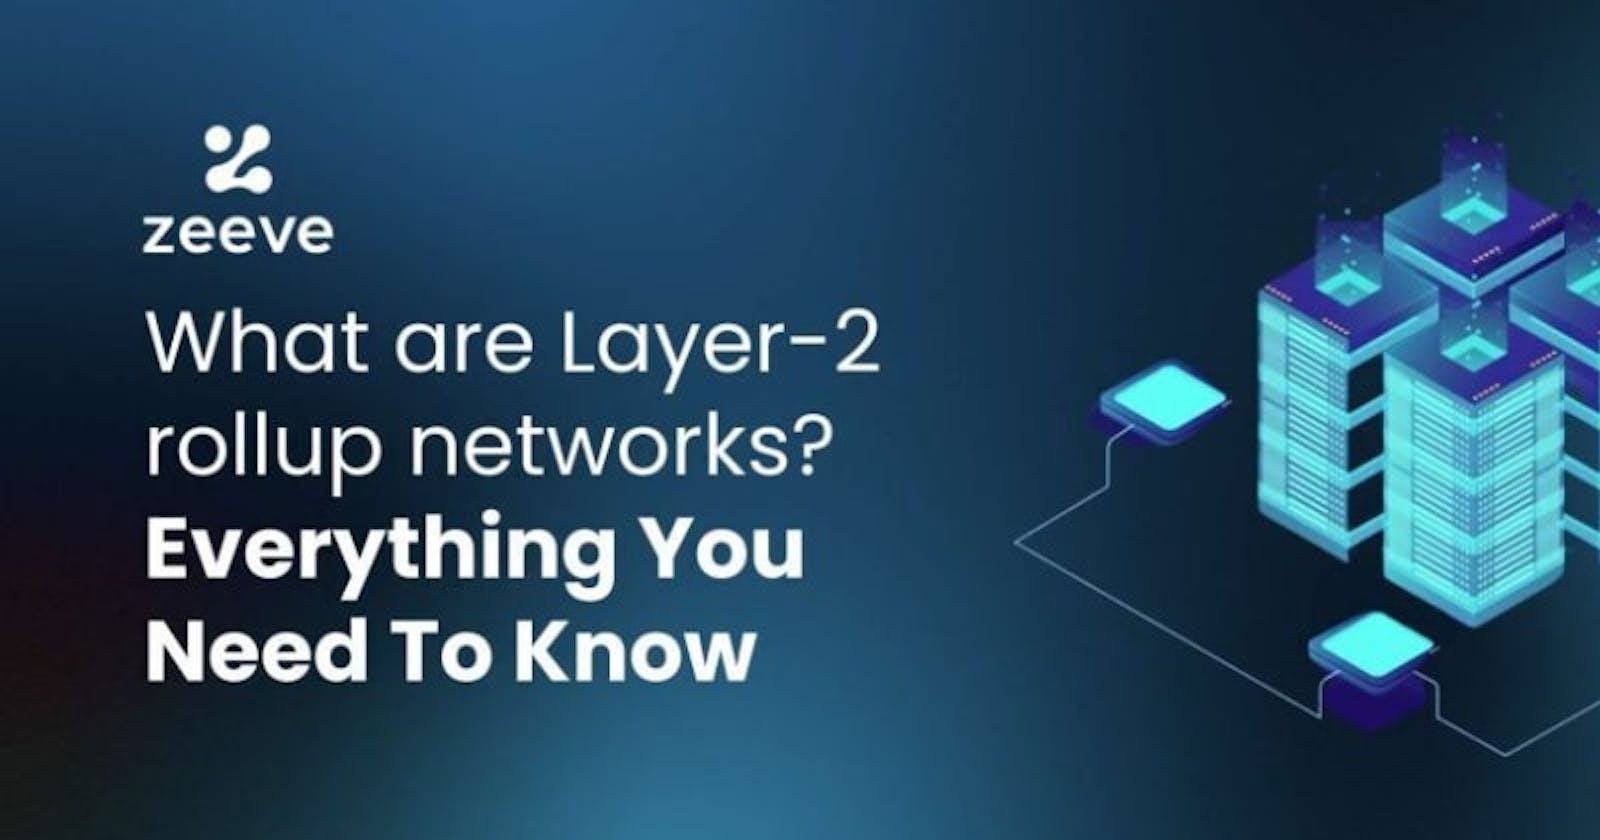 What are Layer-2 rollup networks? Everything You Need To Know